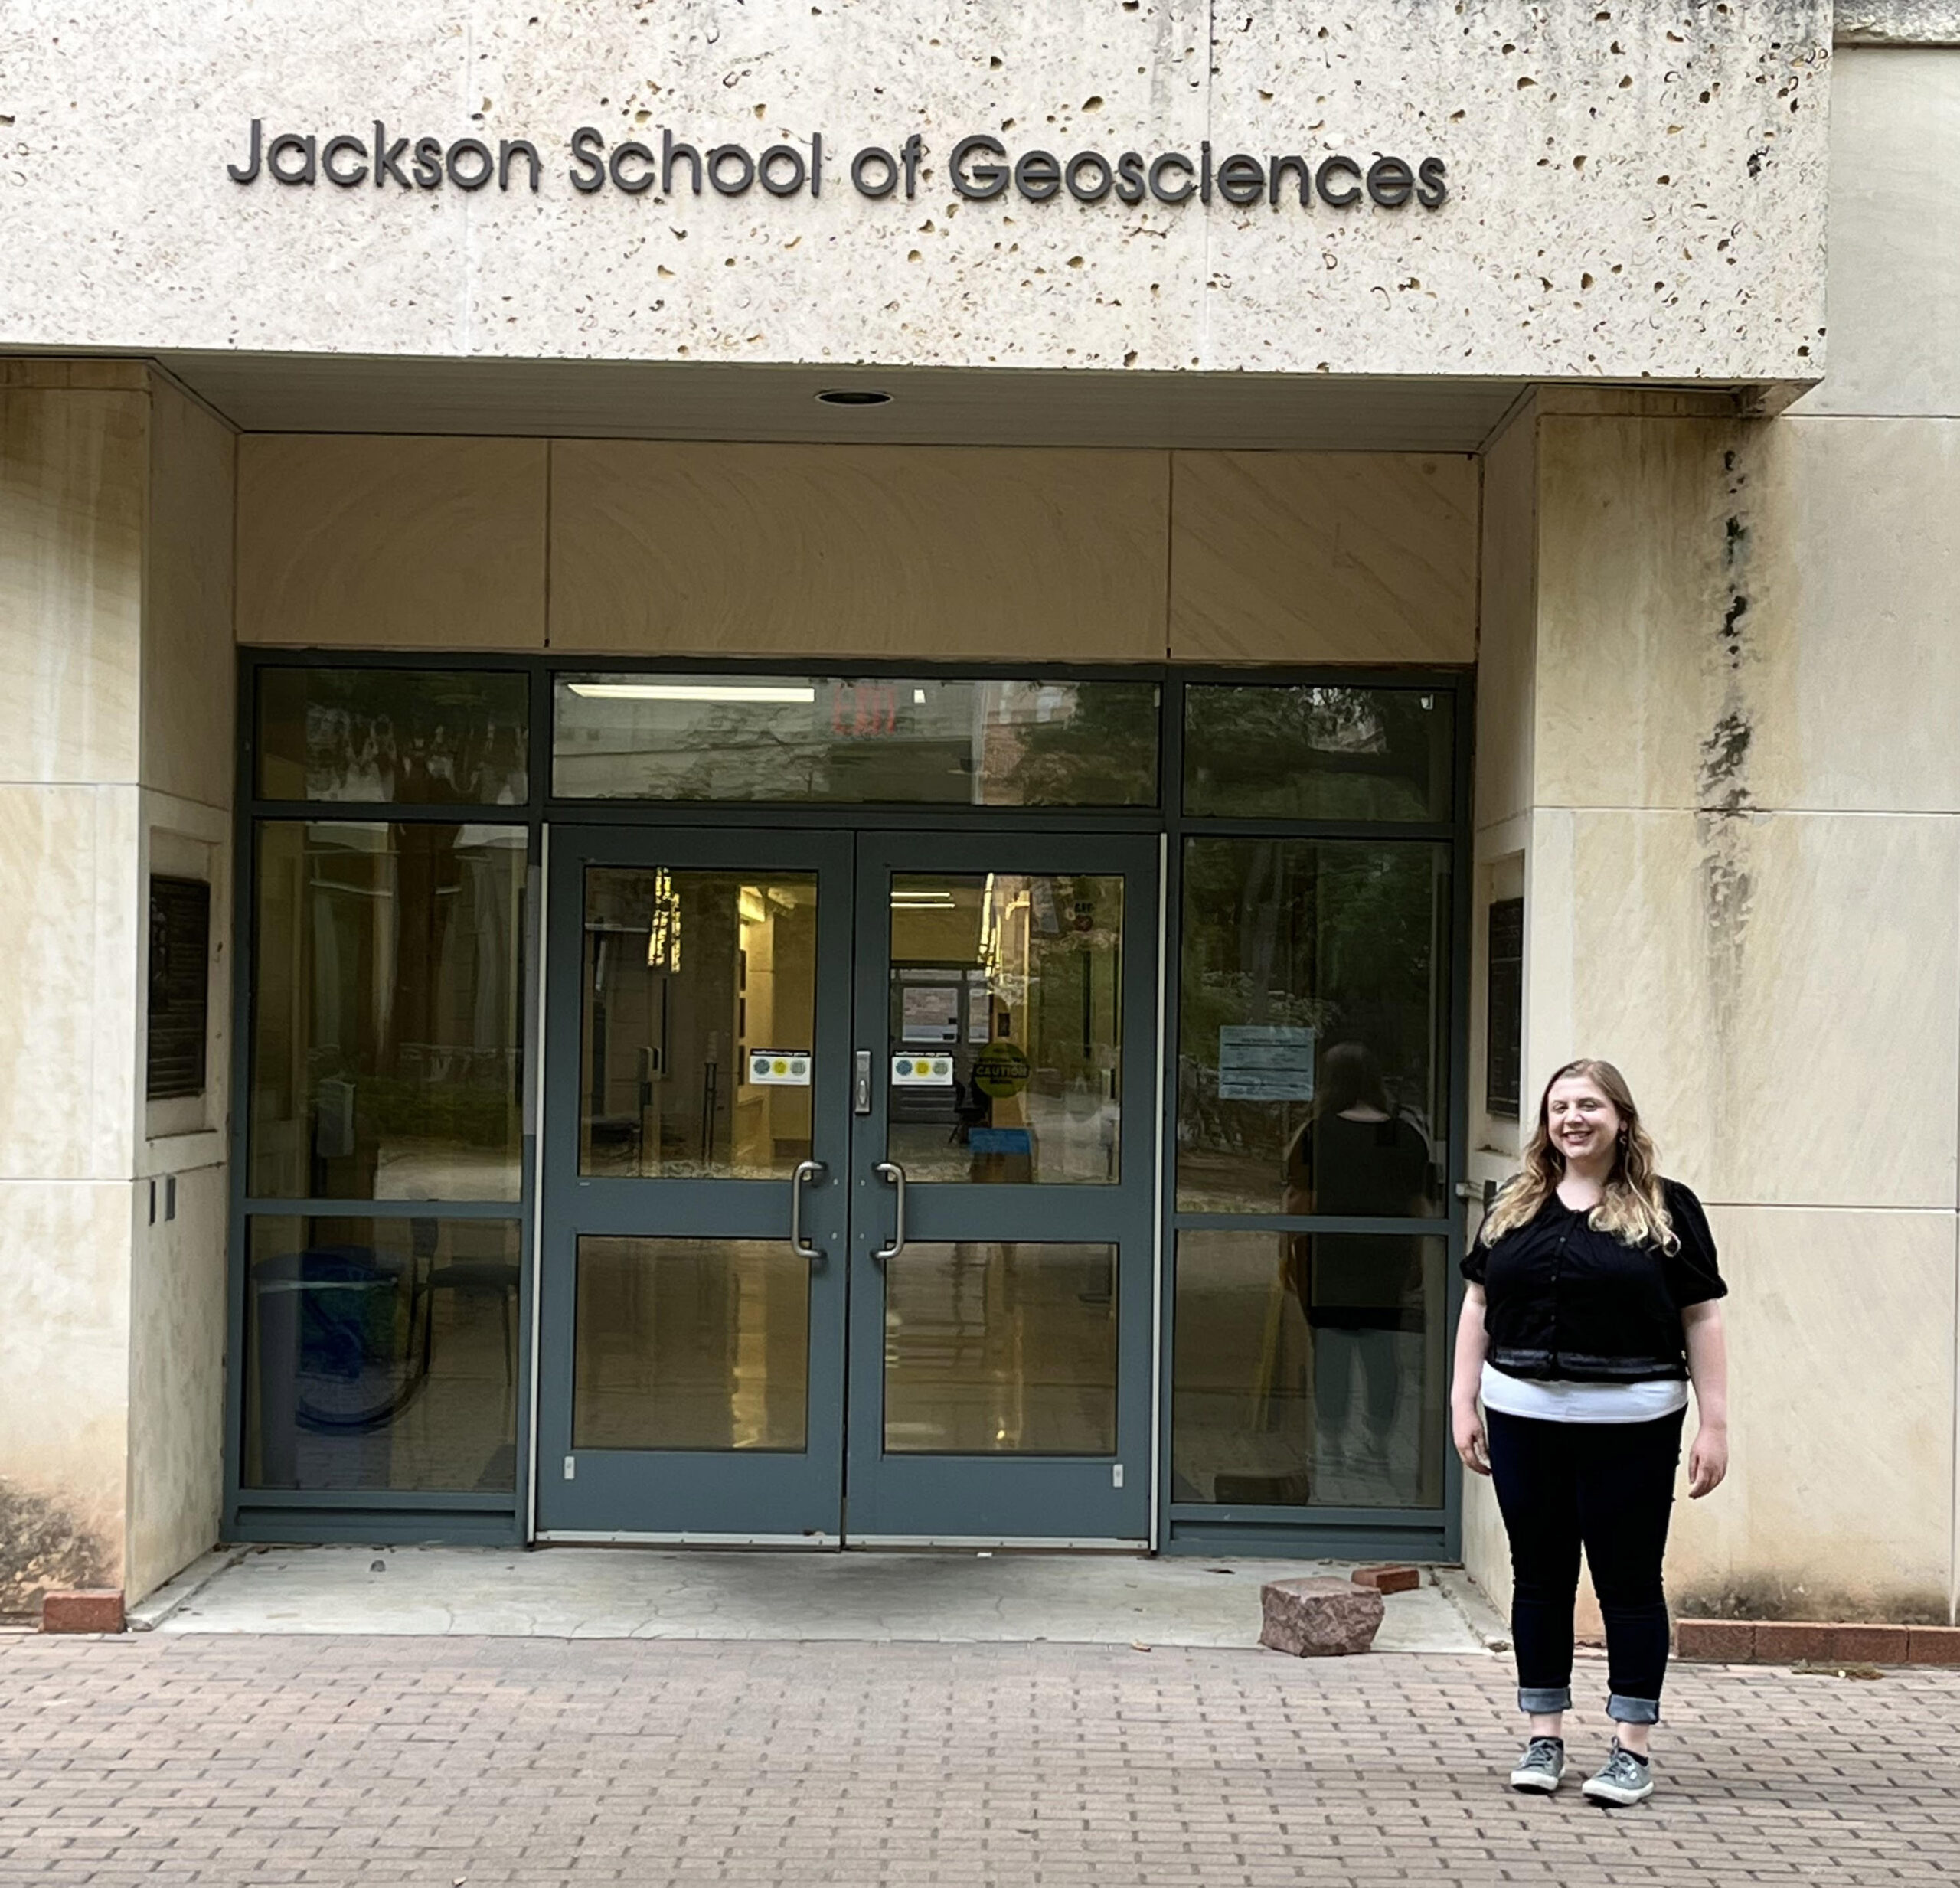 photo of woman standing in front of building labeled Jackson School of Geosciences